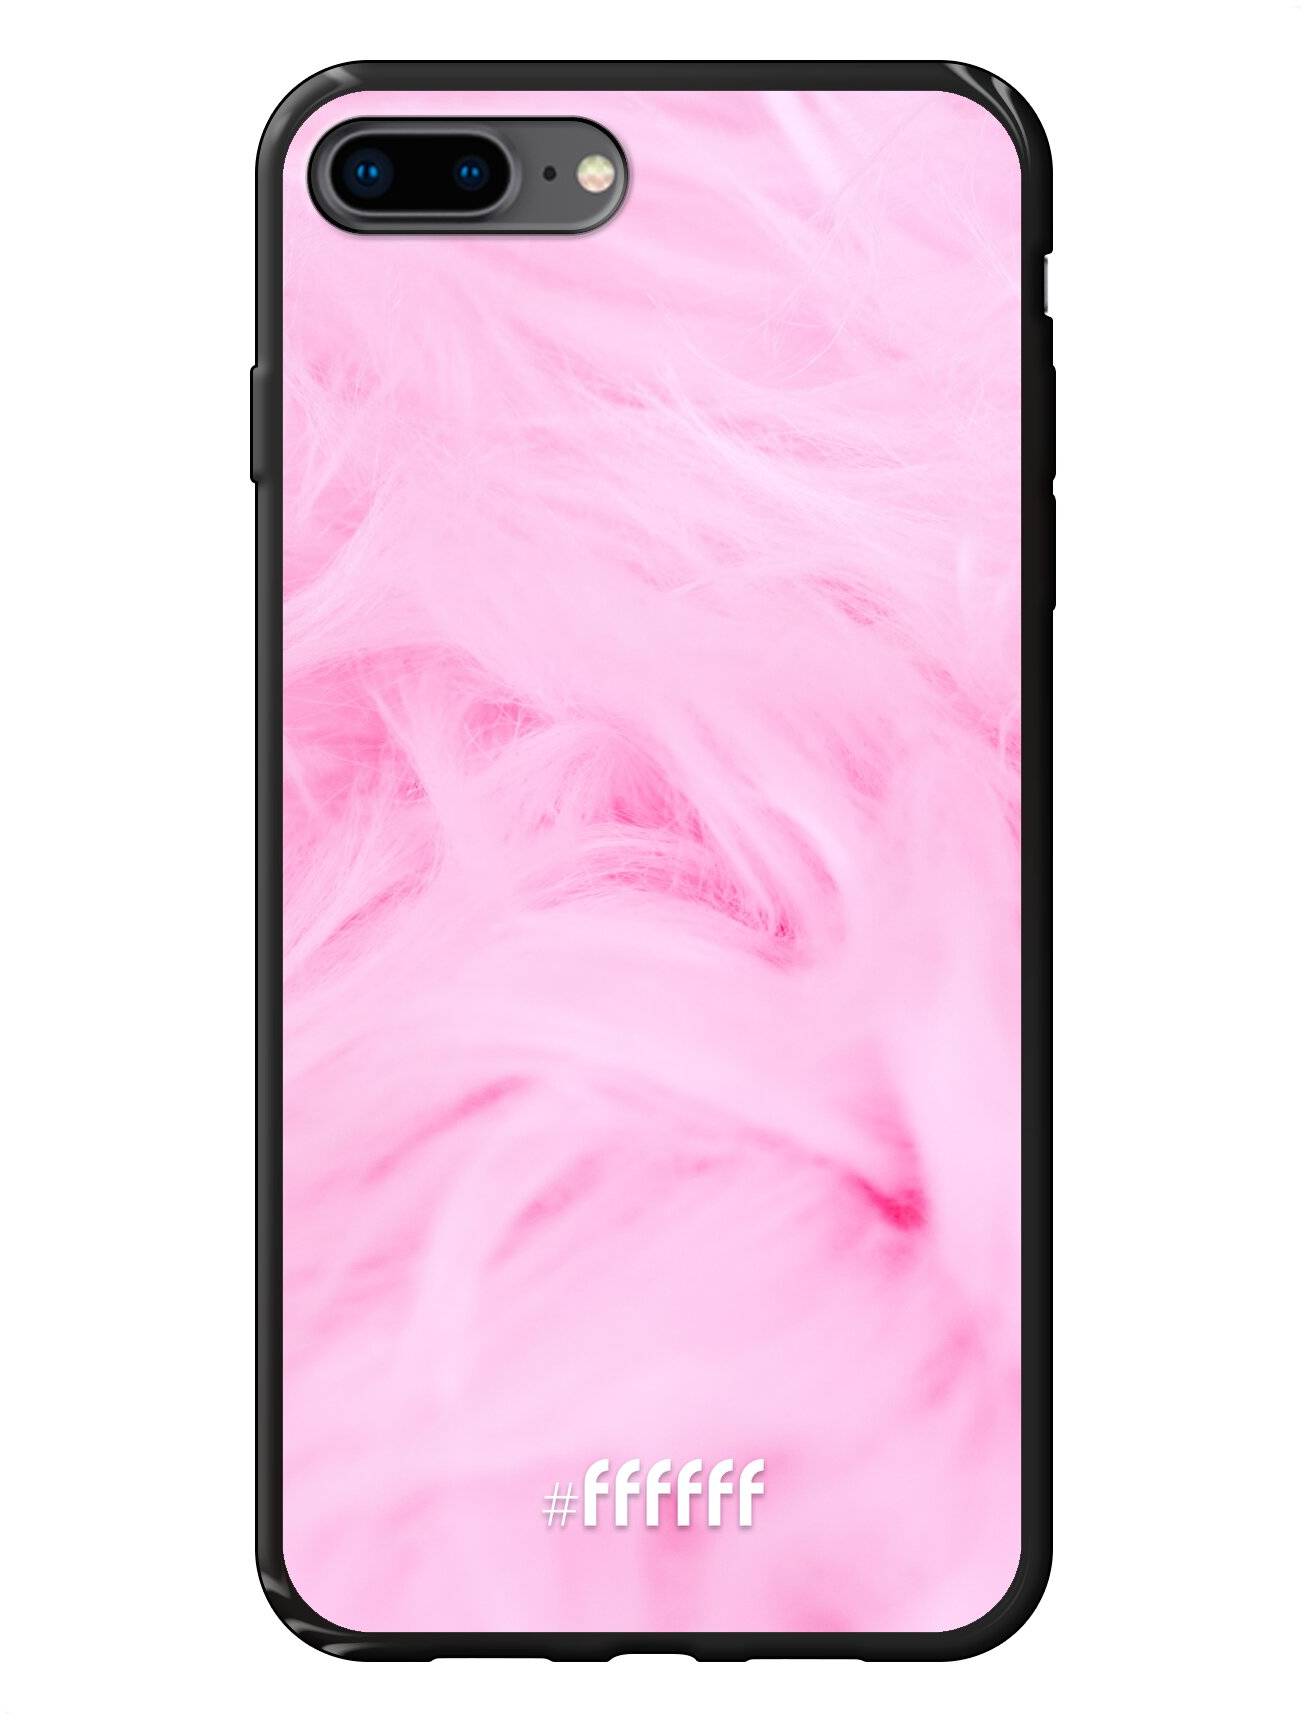 Cotton Candy iPhone 8 Plus